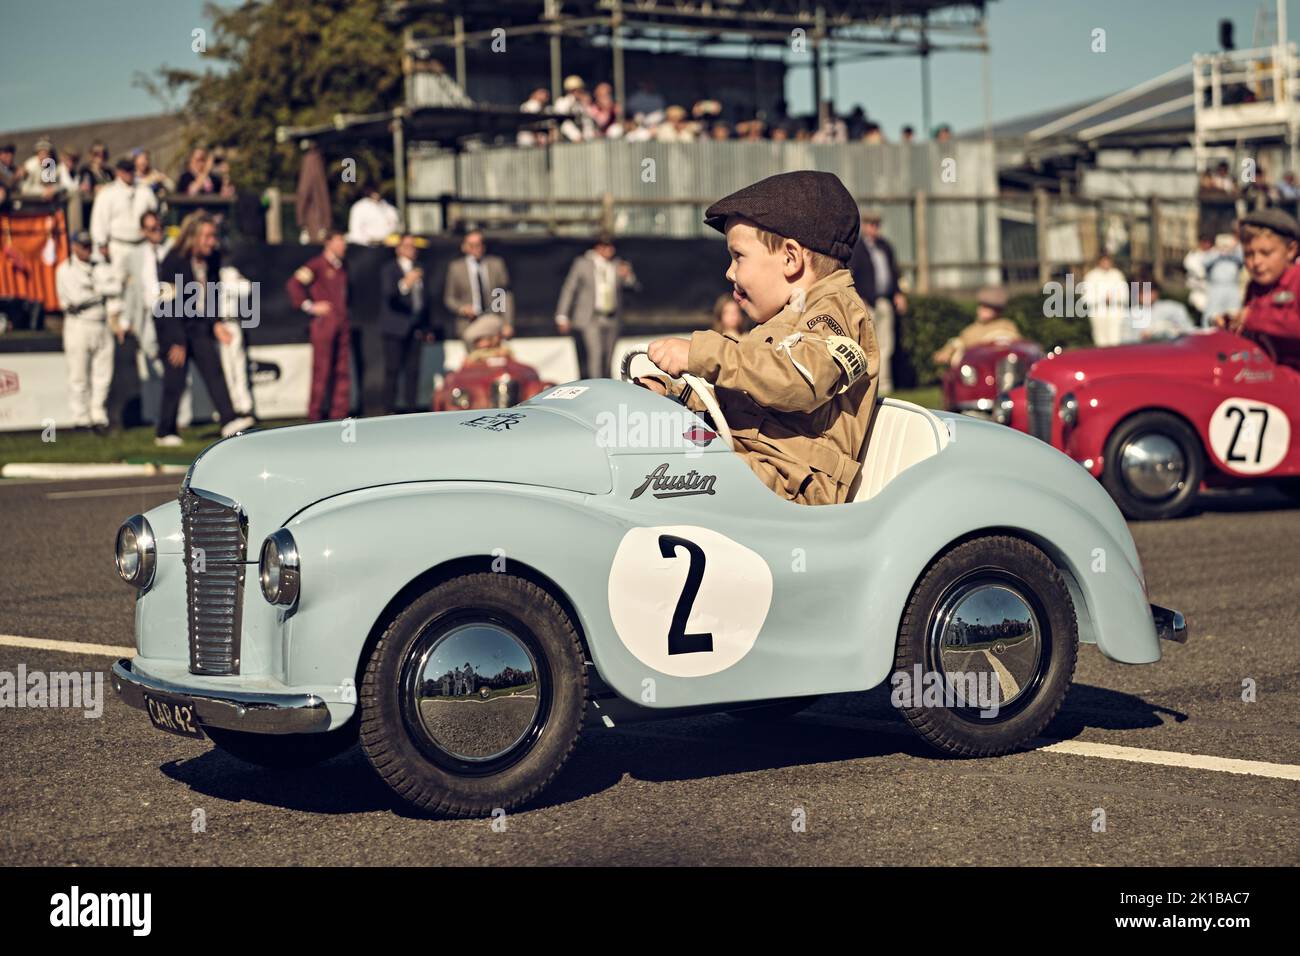 Goodwood, Chichester, UK. 17th Sept, 2022. Pedal car and Driver during the Settrington Cup - J40 Pedal Car Race at the Goodwood Revival (Photo by Gergo Toth / Alamy Live News) Stock Photo